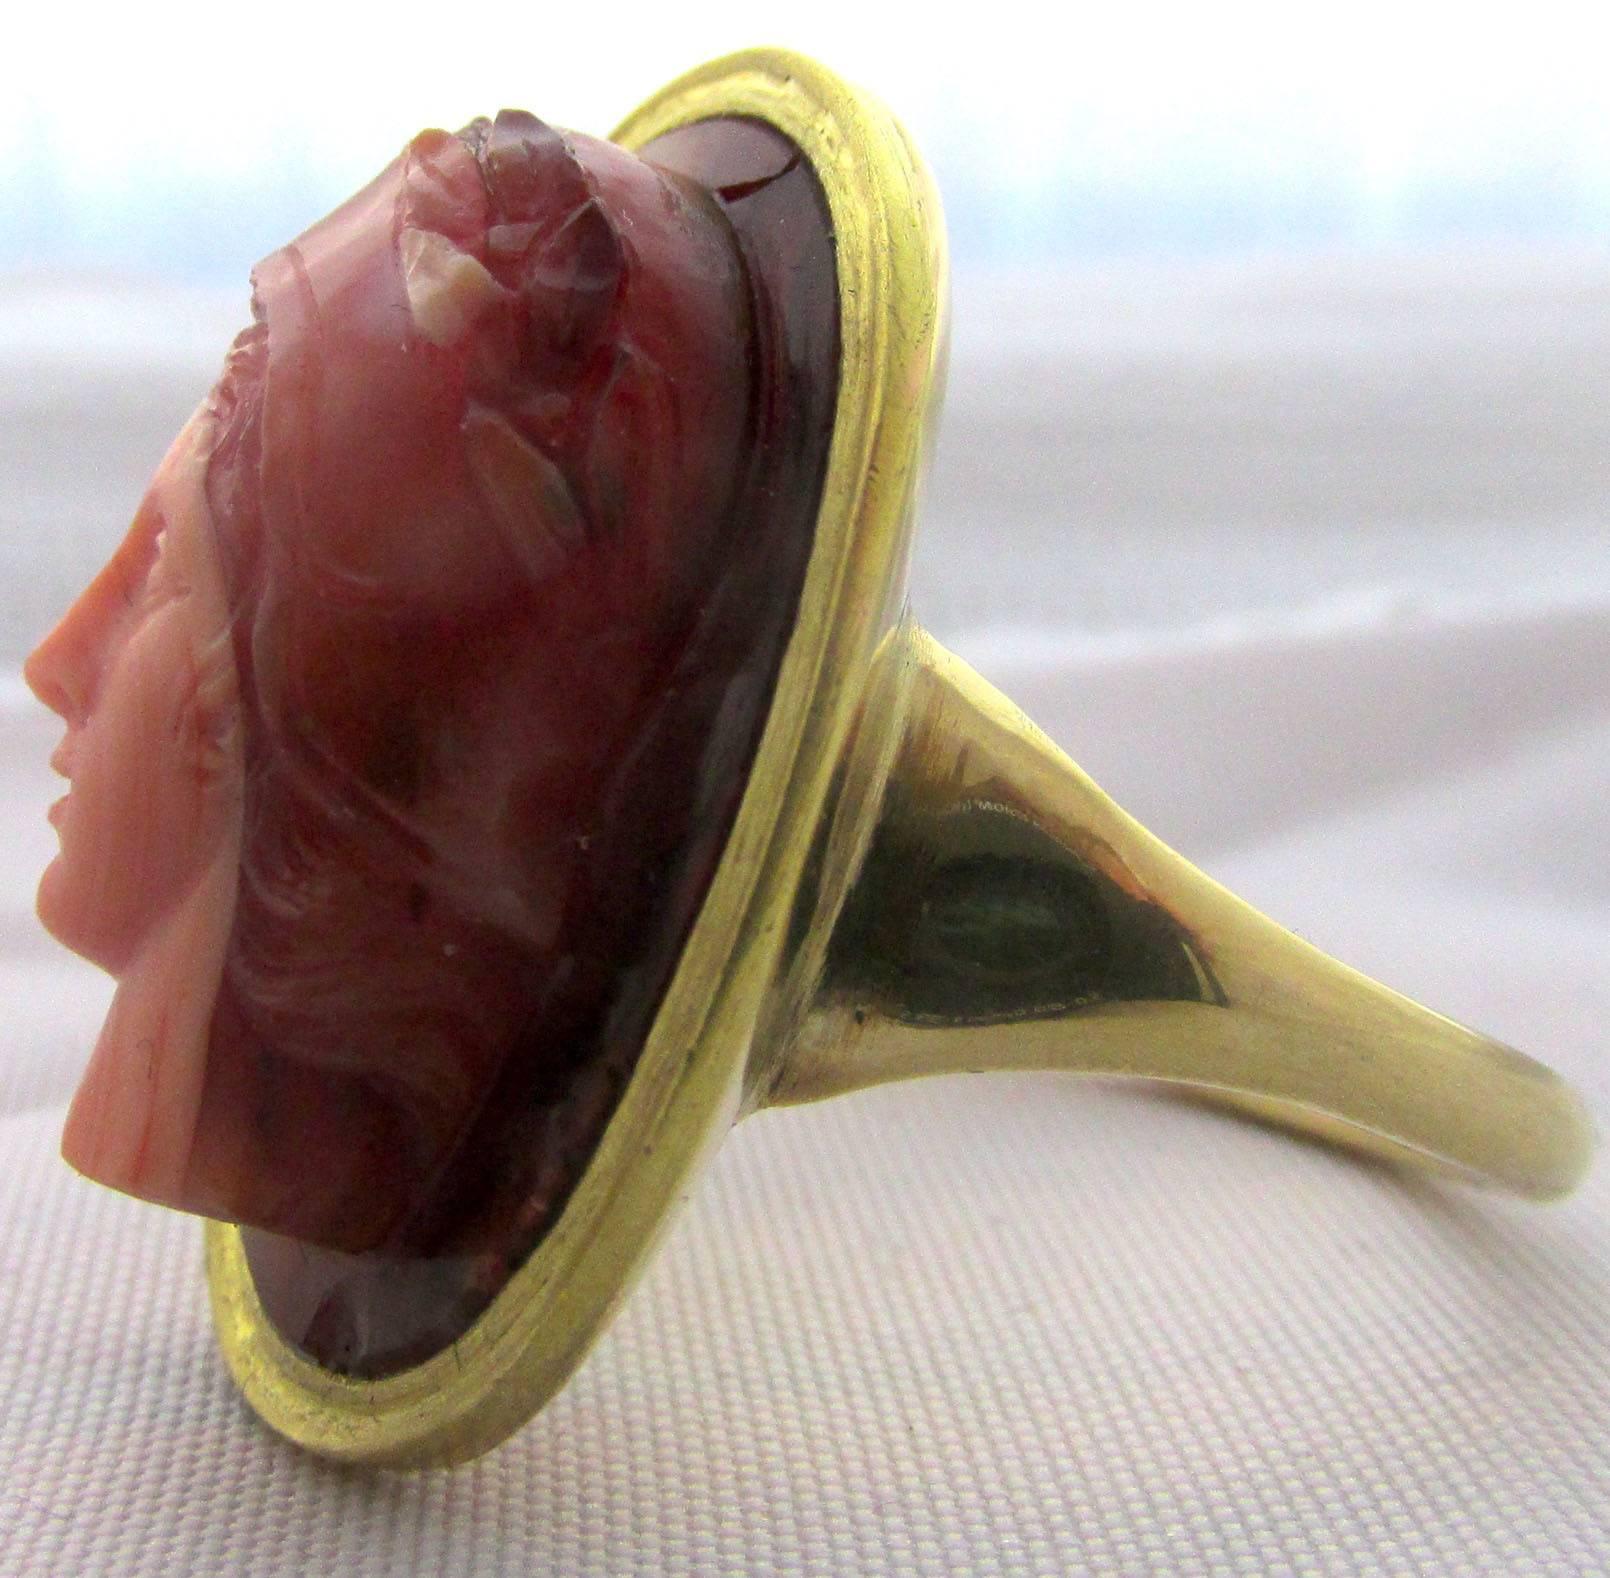 18th century,  15K gold ring set with a banded agate cameo of the goddess Athena. This deeply carved Italian cameo dates to c. 1780, possibly carved by Morelli Amastini Bernini.   It is not inlaid but is brilliantly carved from a single stone. The